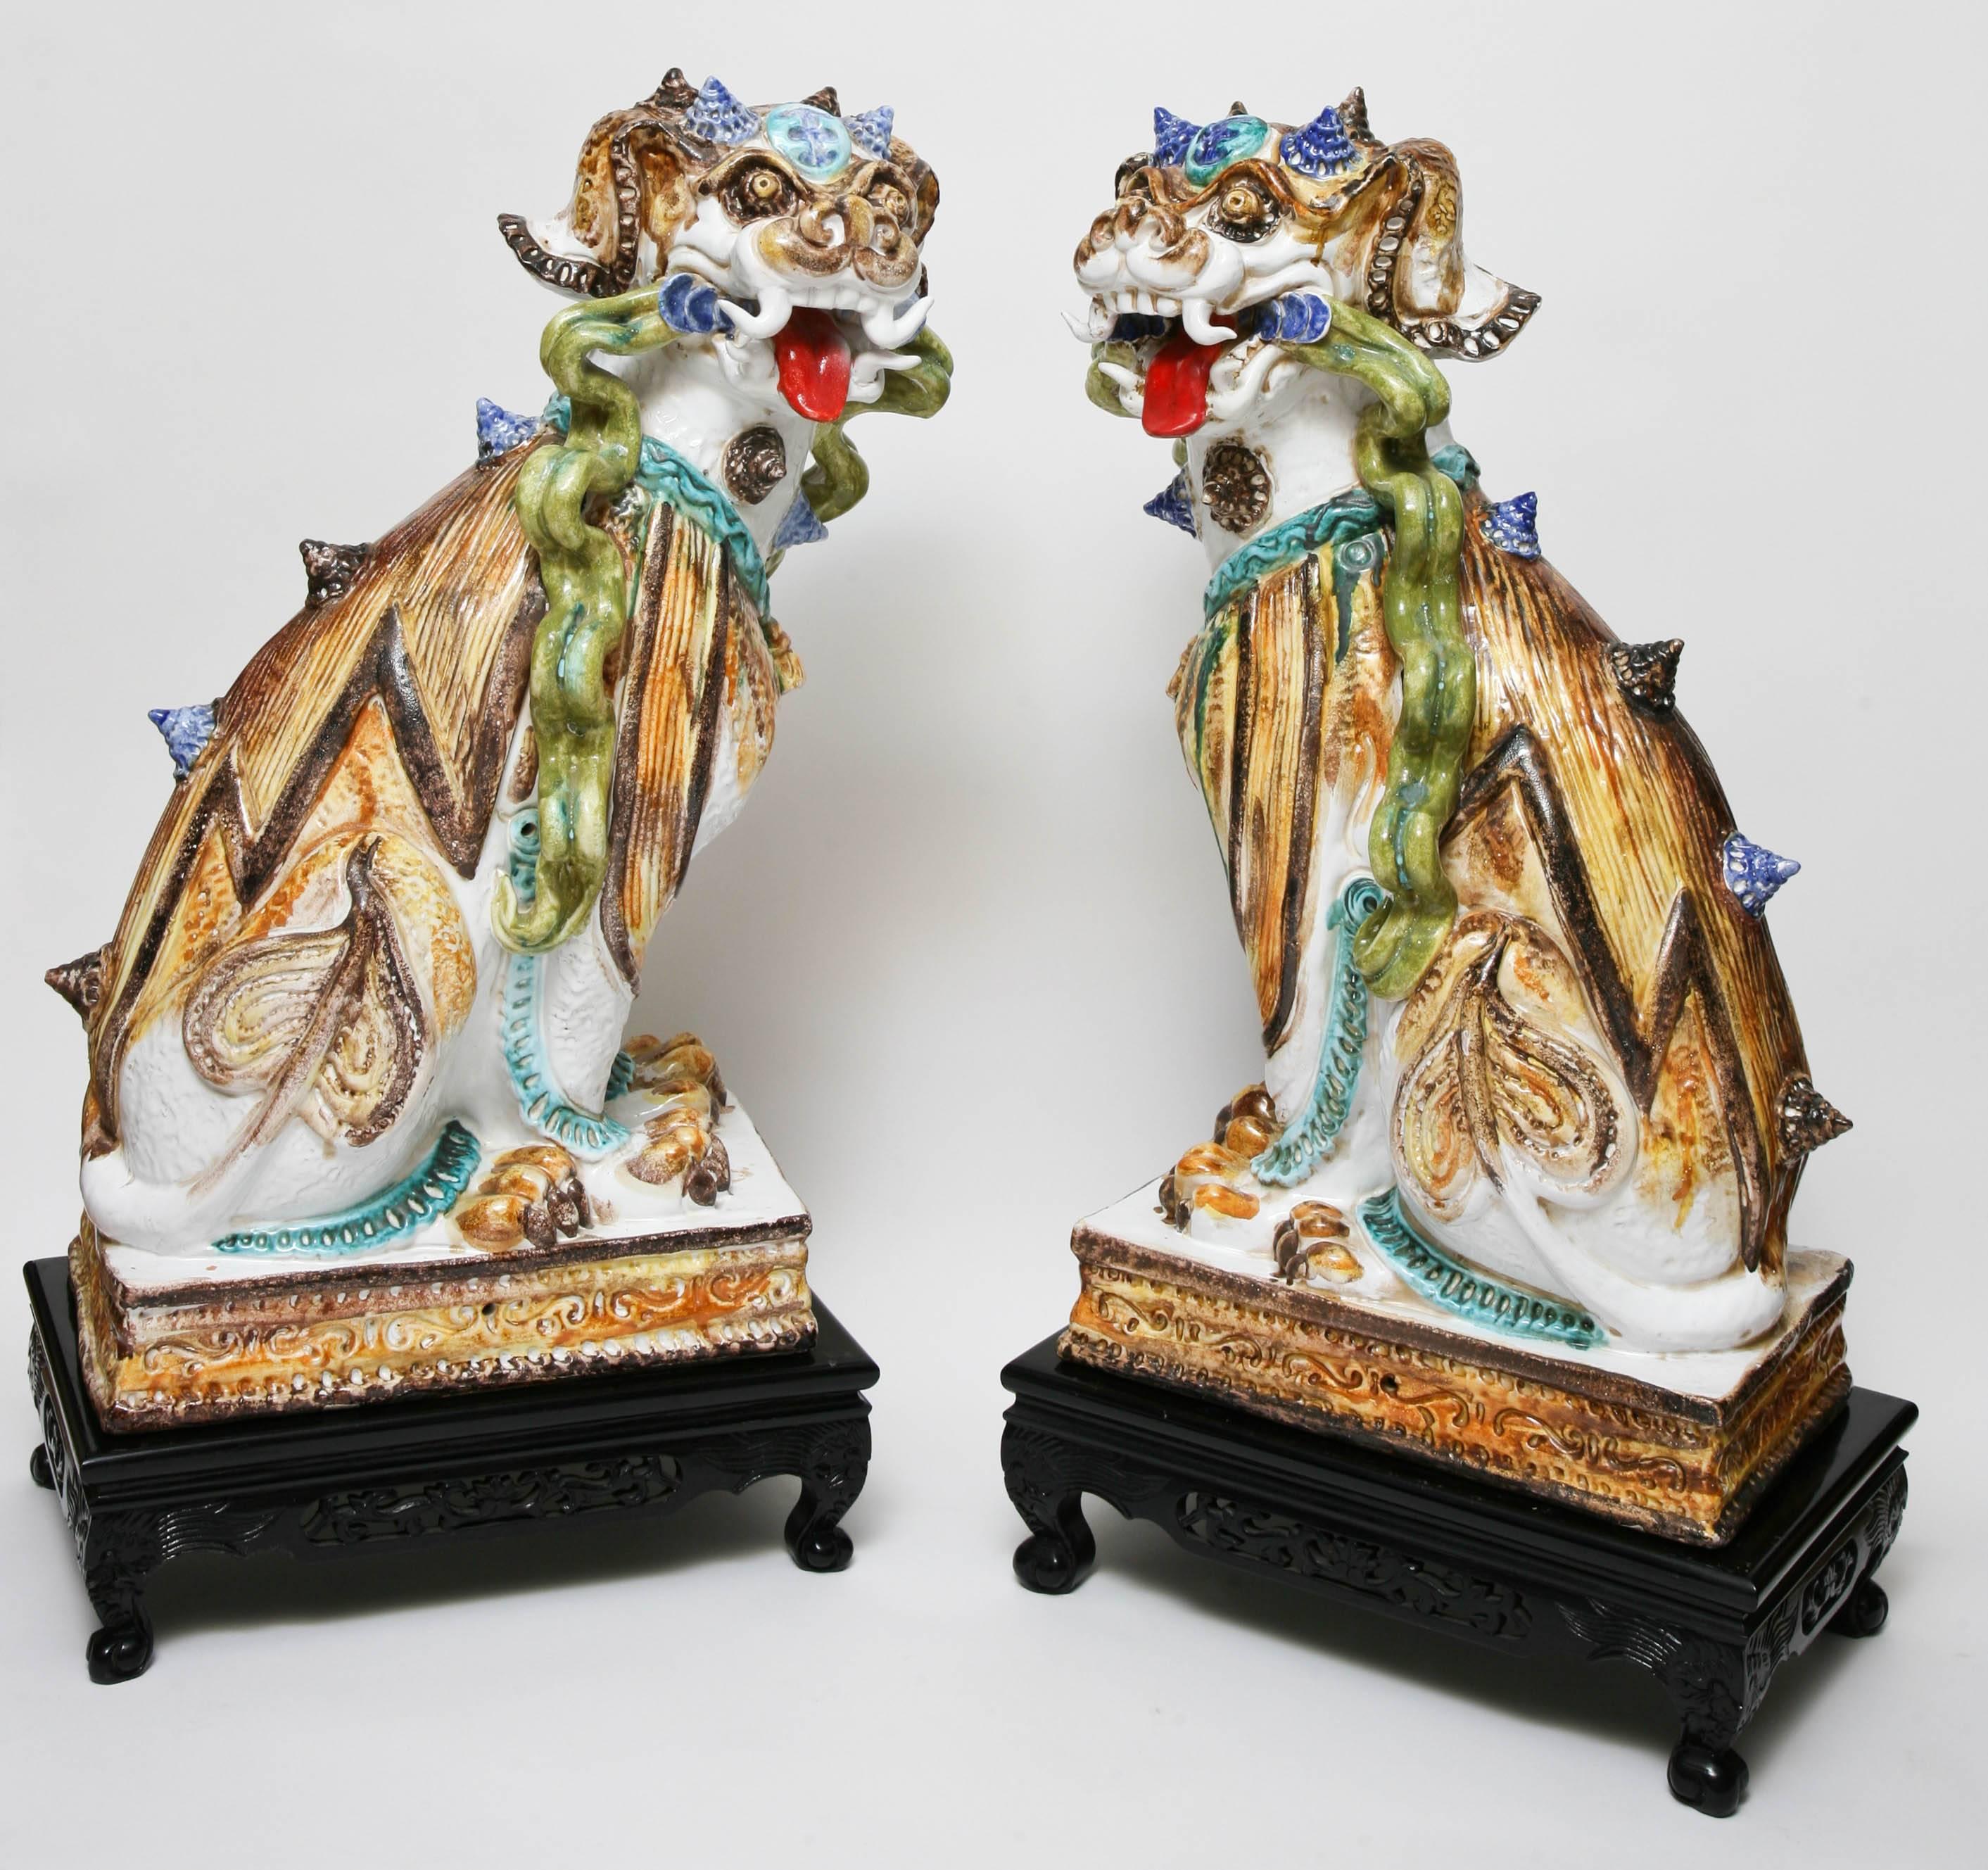 Fabulous pair of large multicolored glazed terra cotta foo dogs on bases.